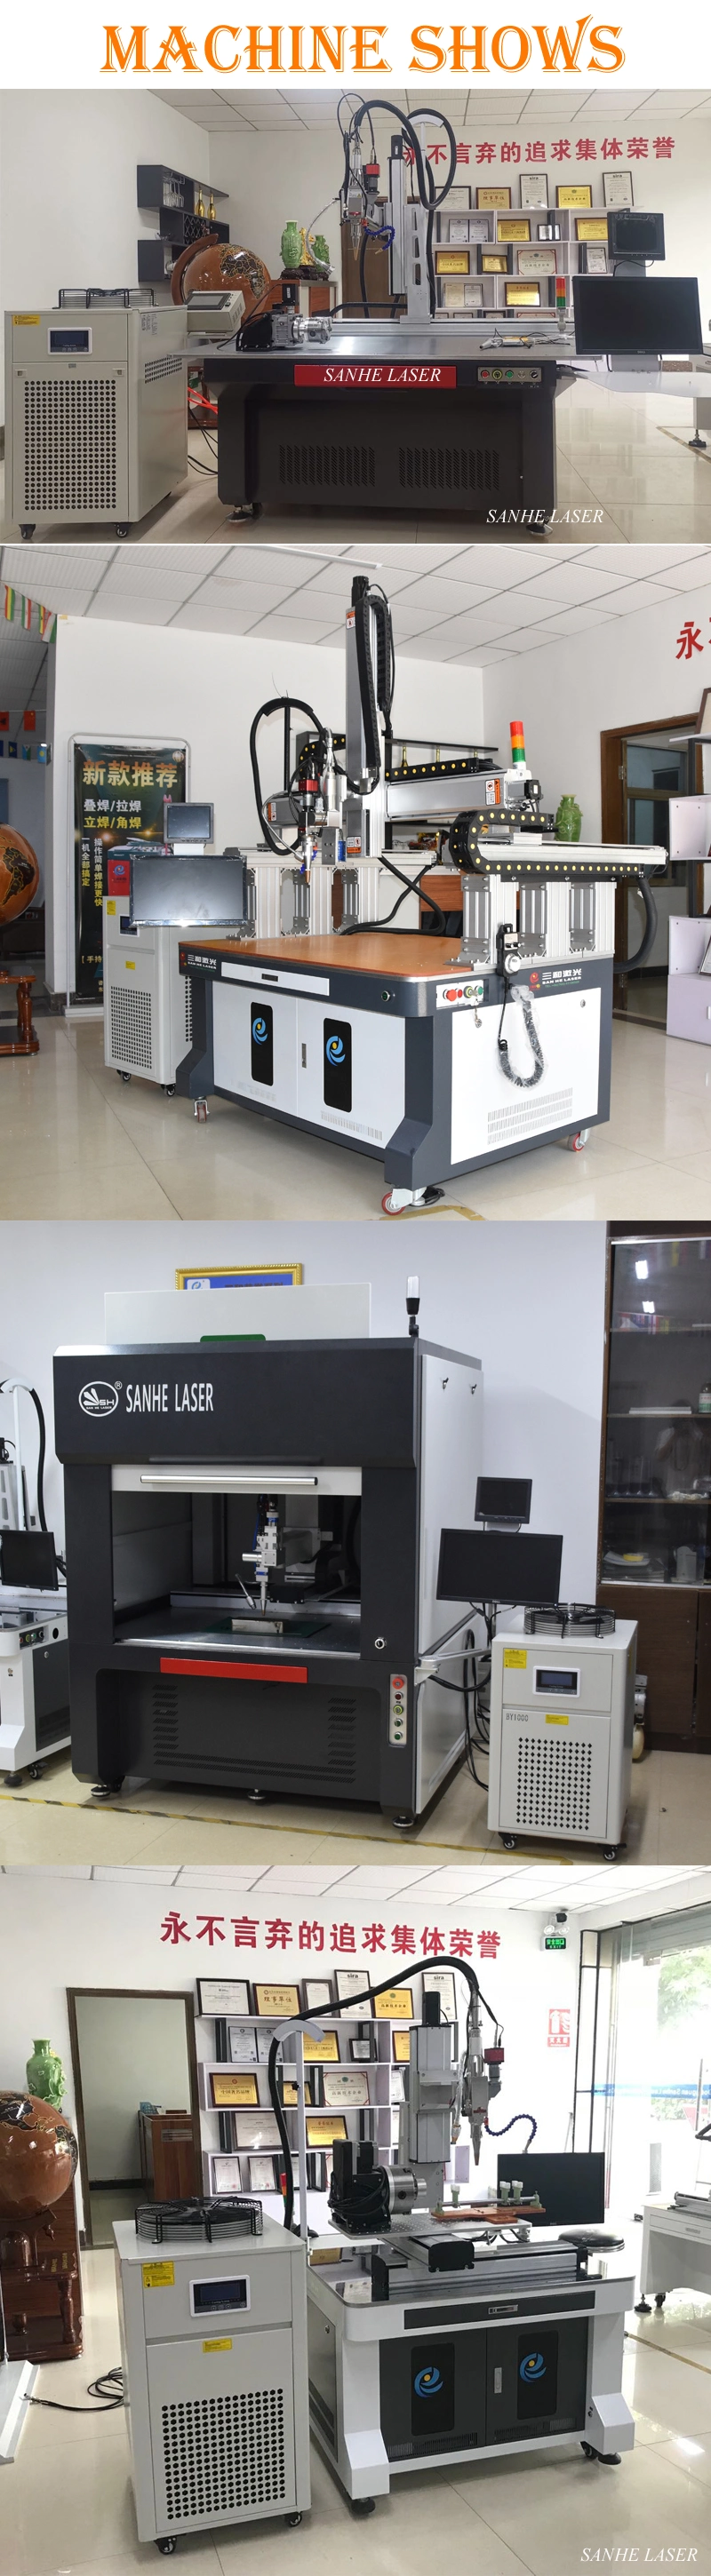 2000W/1500W Automatic Type Laser Welding Machine for Aluminum Copper Stainless Steel with Feeding Wires Automatic Fiber Continuous/Spot Laser Welding Machine